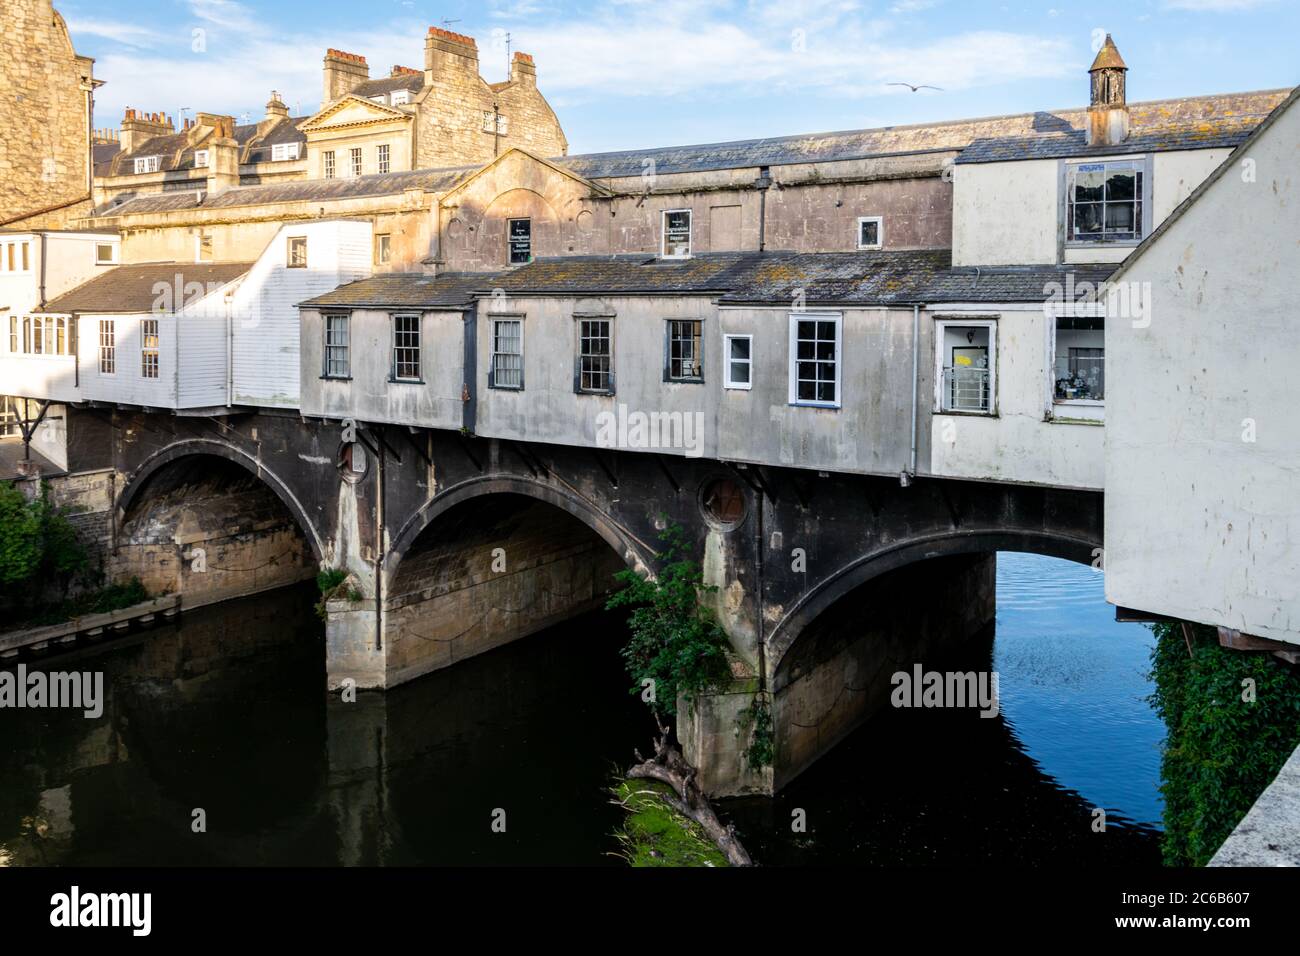 Pulteney Bridge, Bath viewed from the rear, at dusk Stock Photo